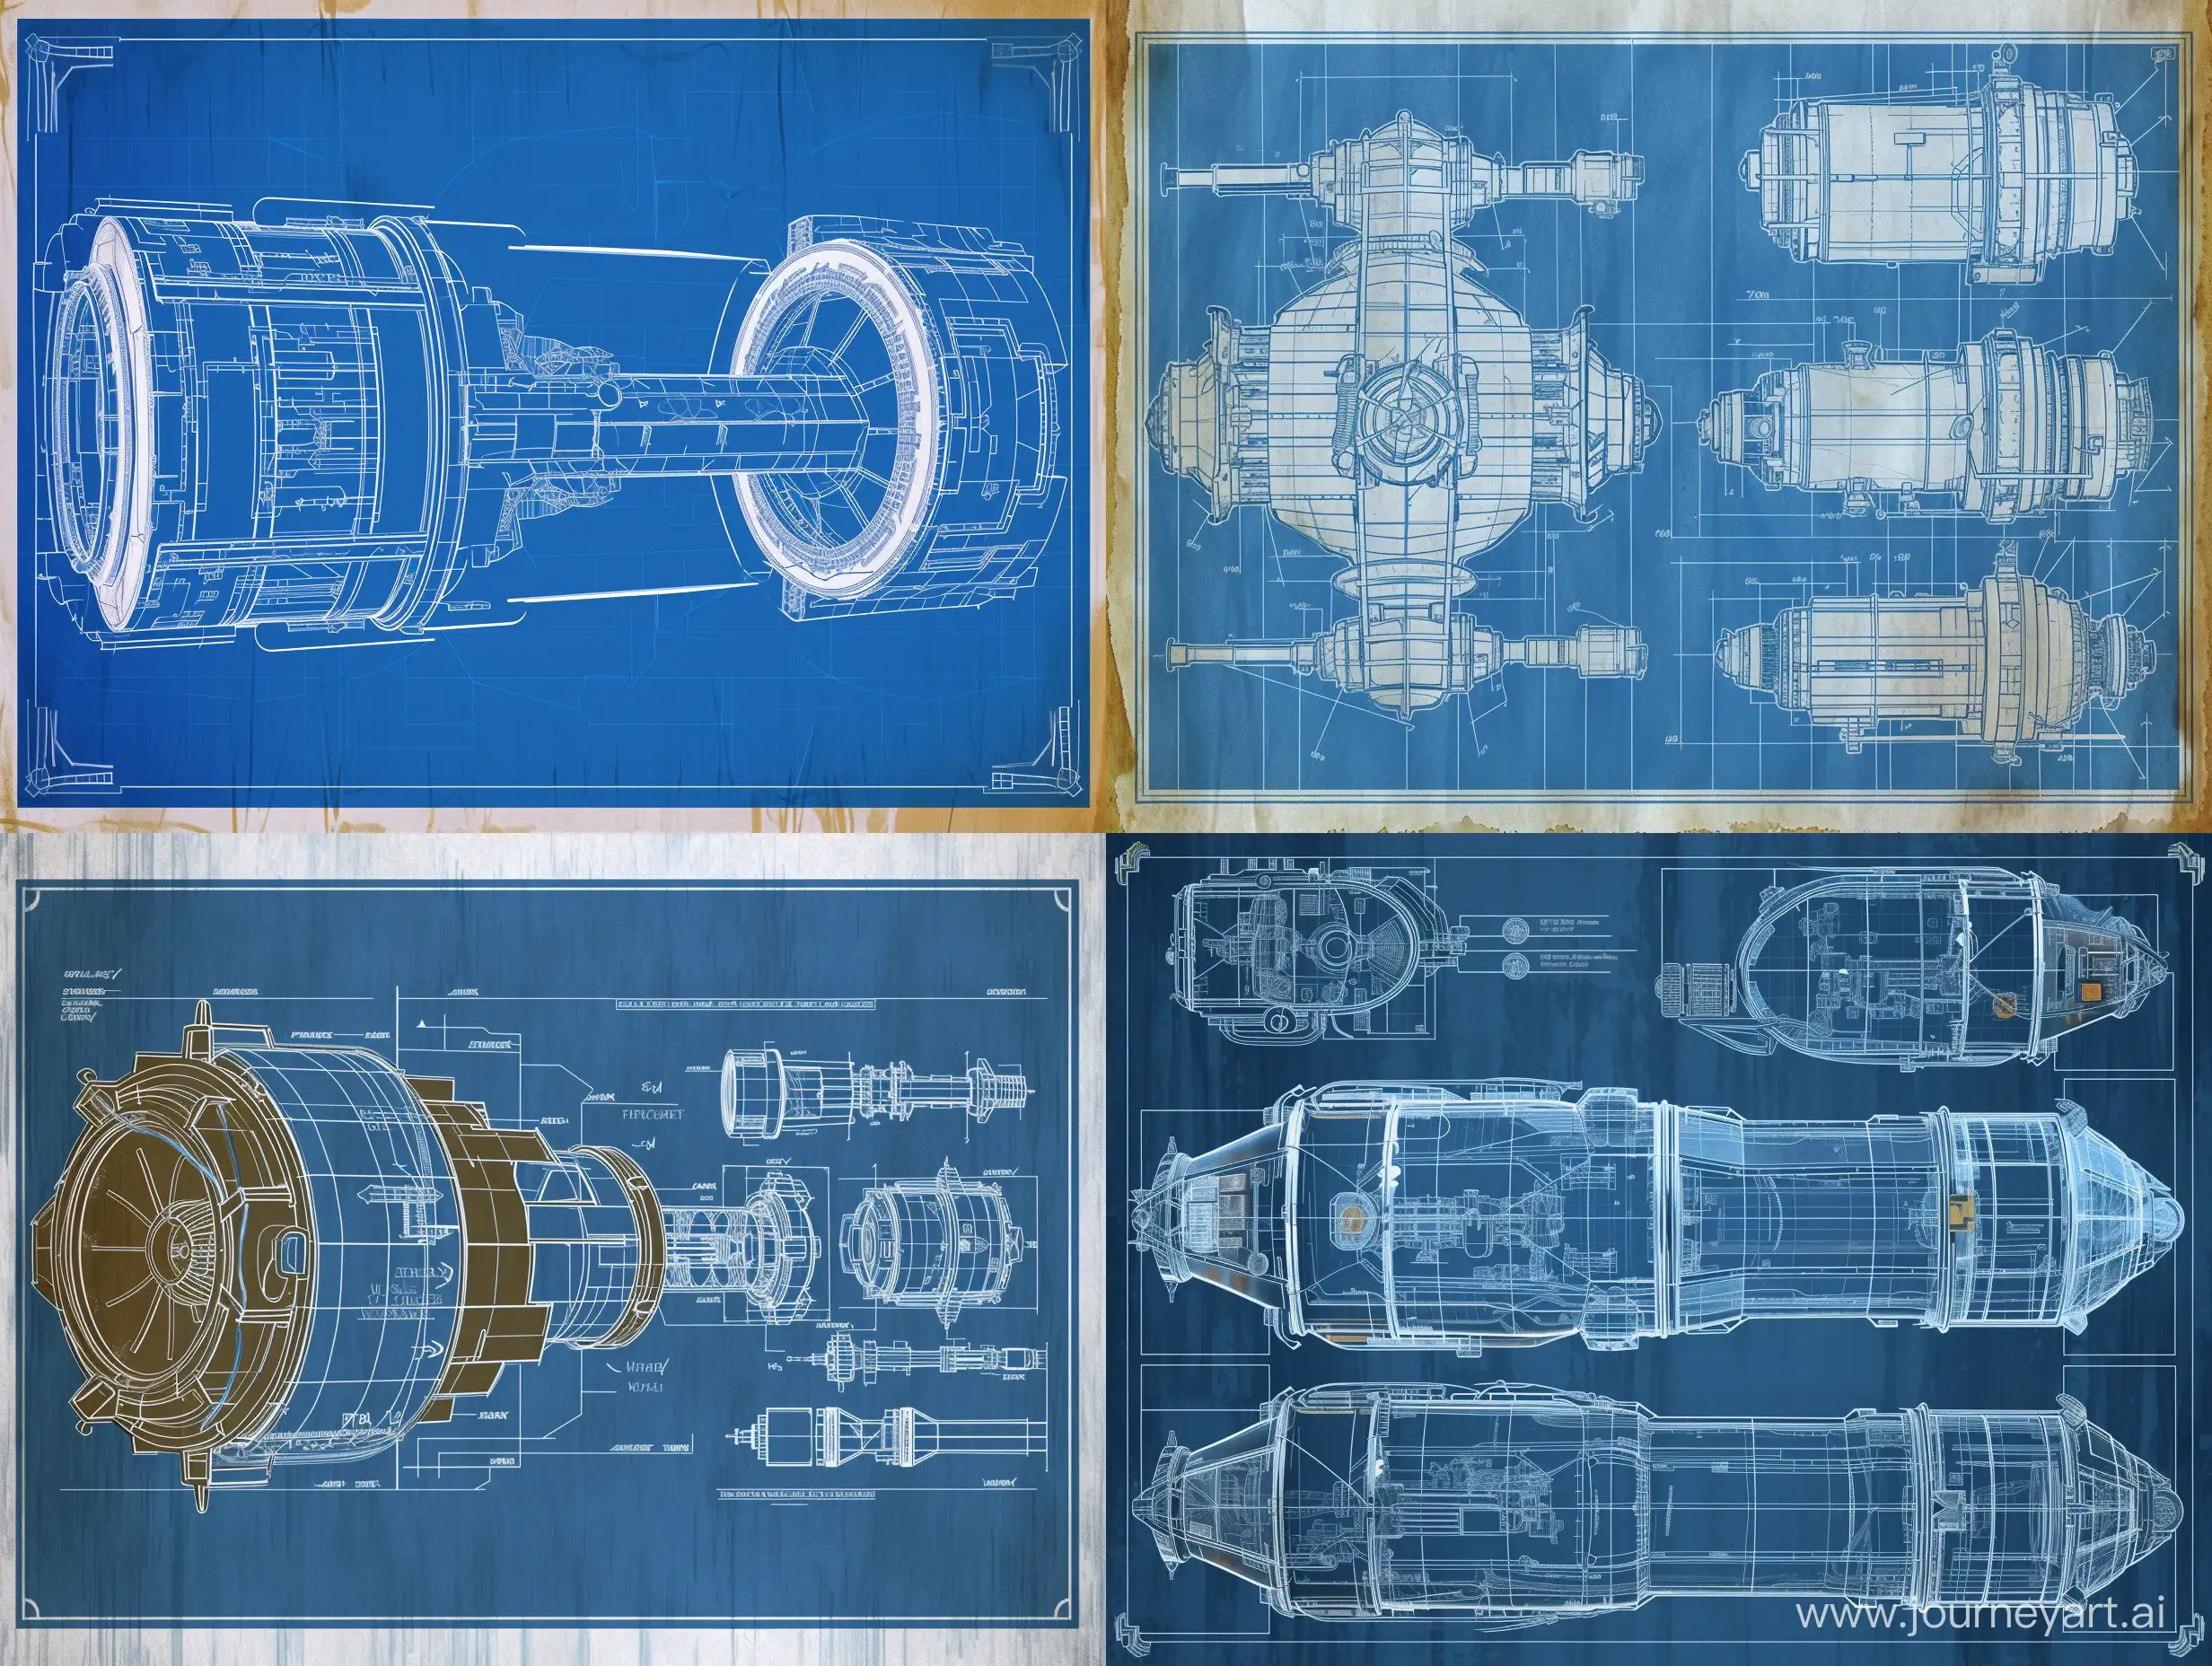 Blueprints with detailed cross sectional views of teleportation/time travel machine for submissions to the patent office.